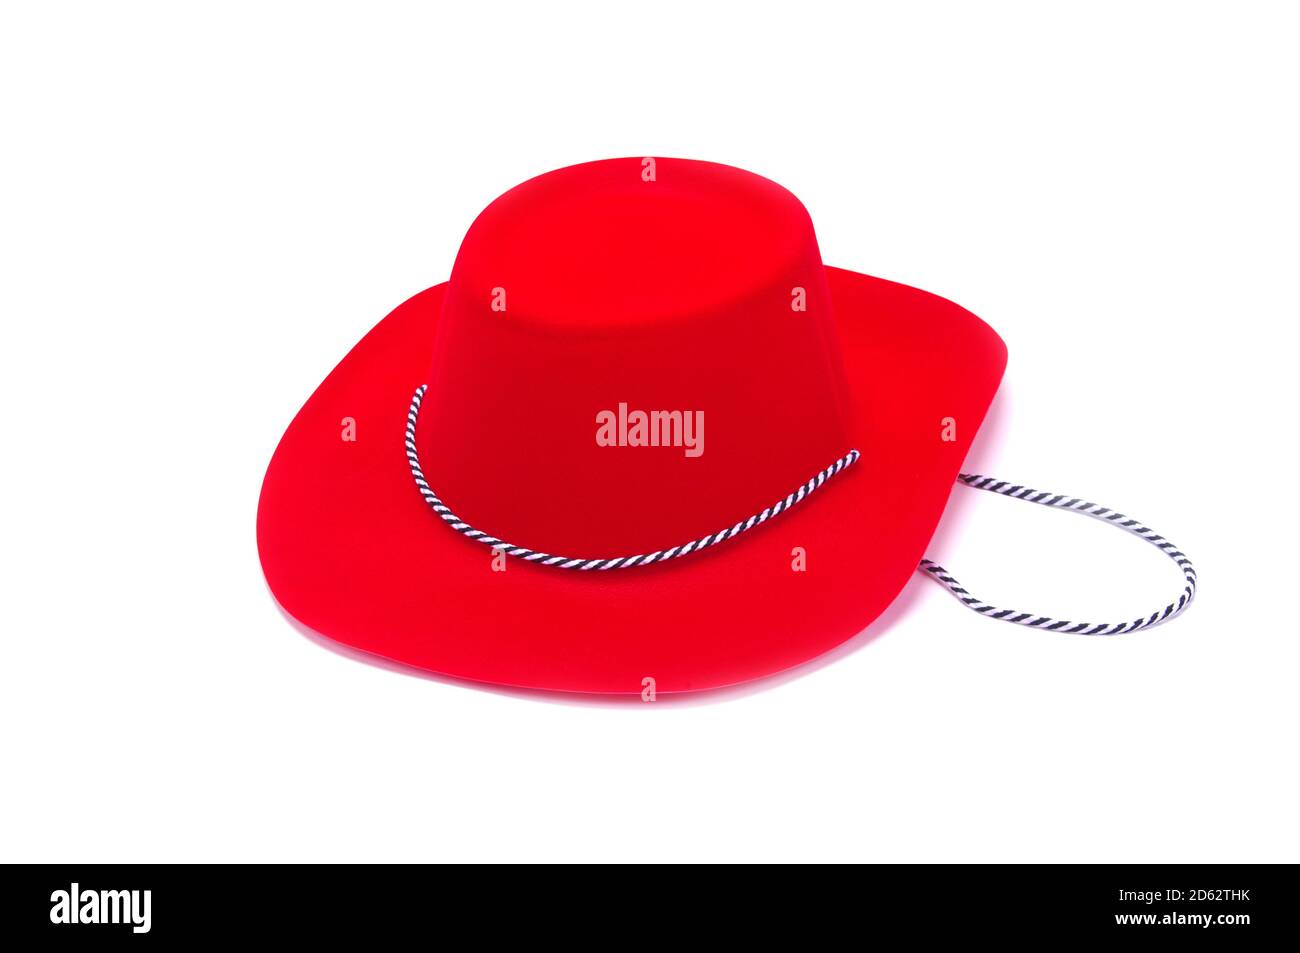 Red hat on a white background Stock Photo